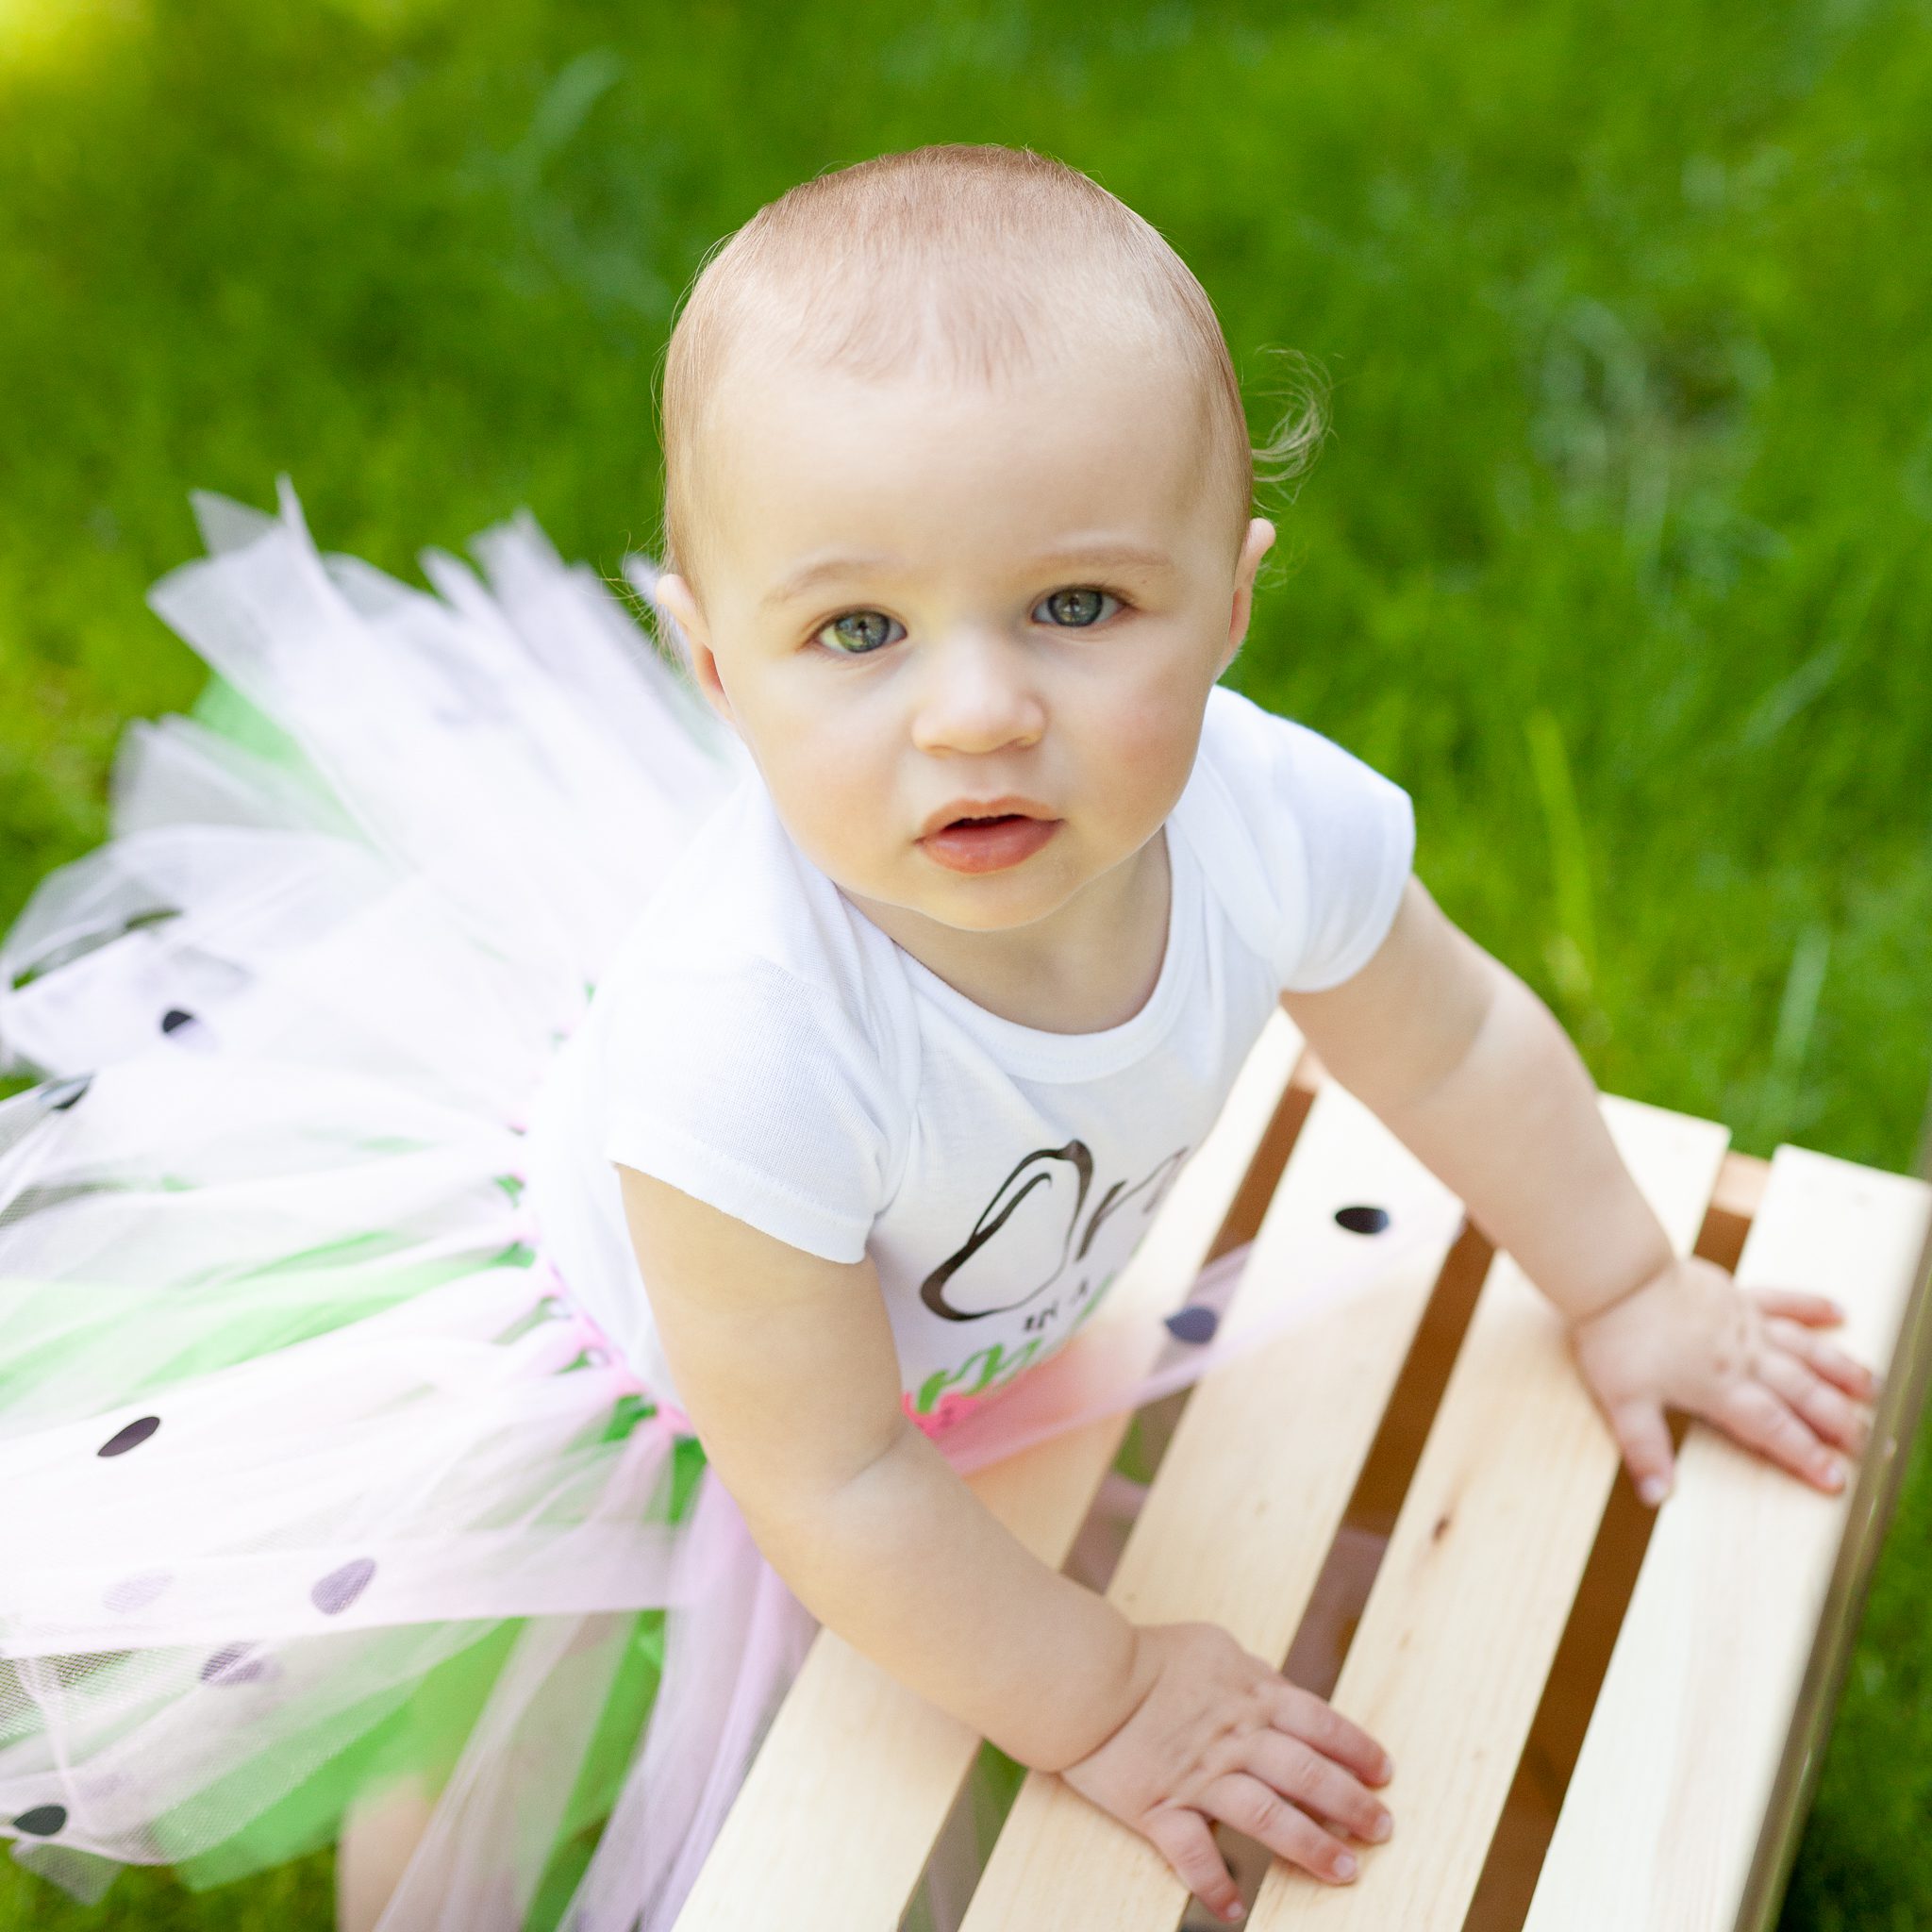 Your one-year-old photo session will give you a chance to capture this special stage in your baby's life.